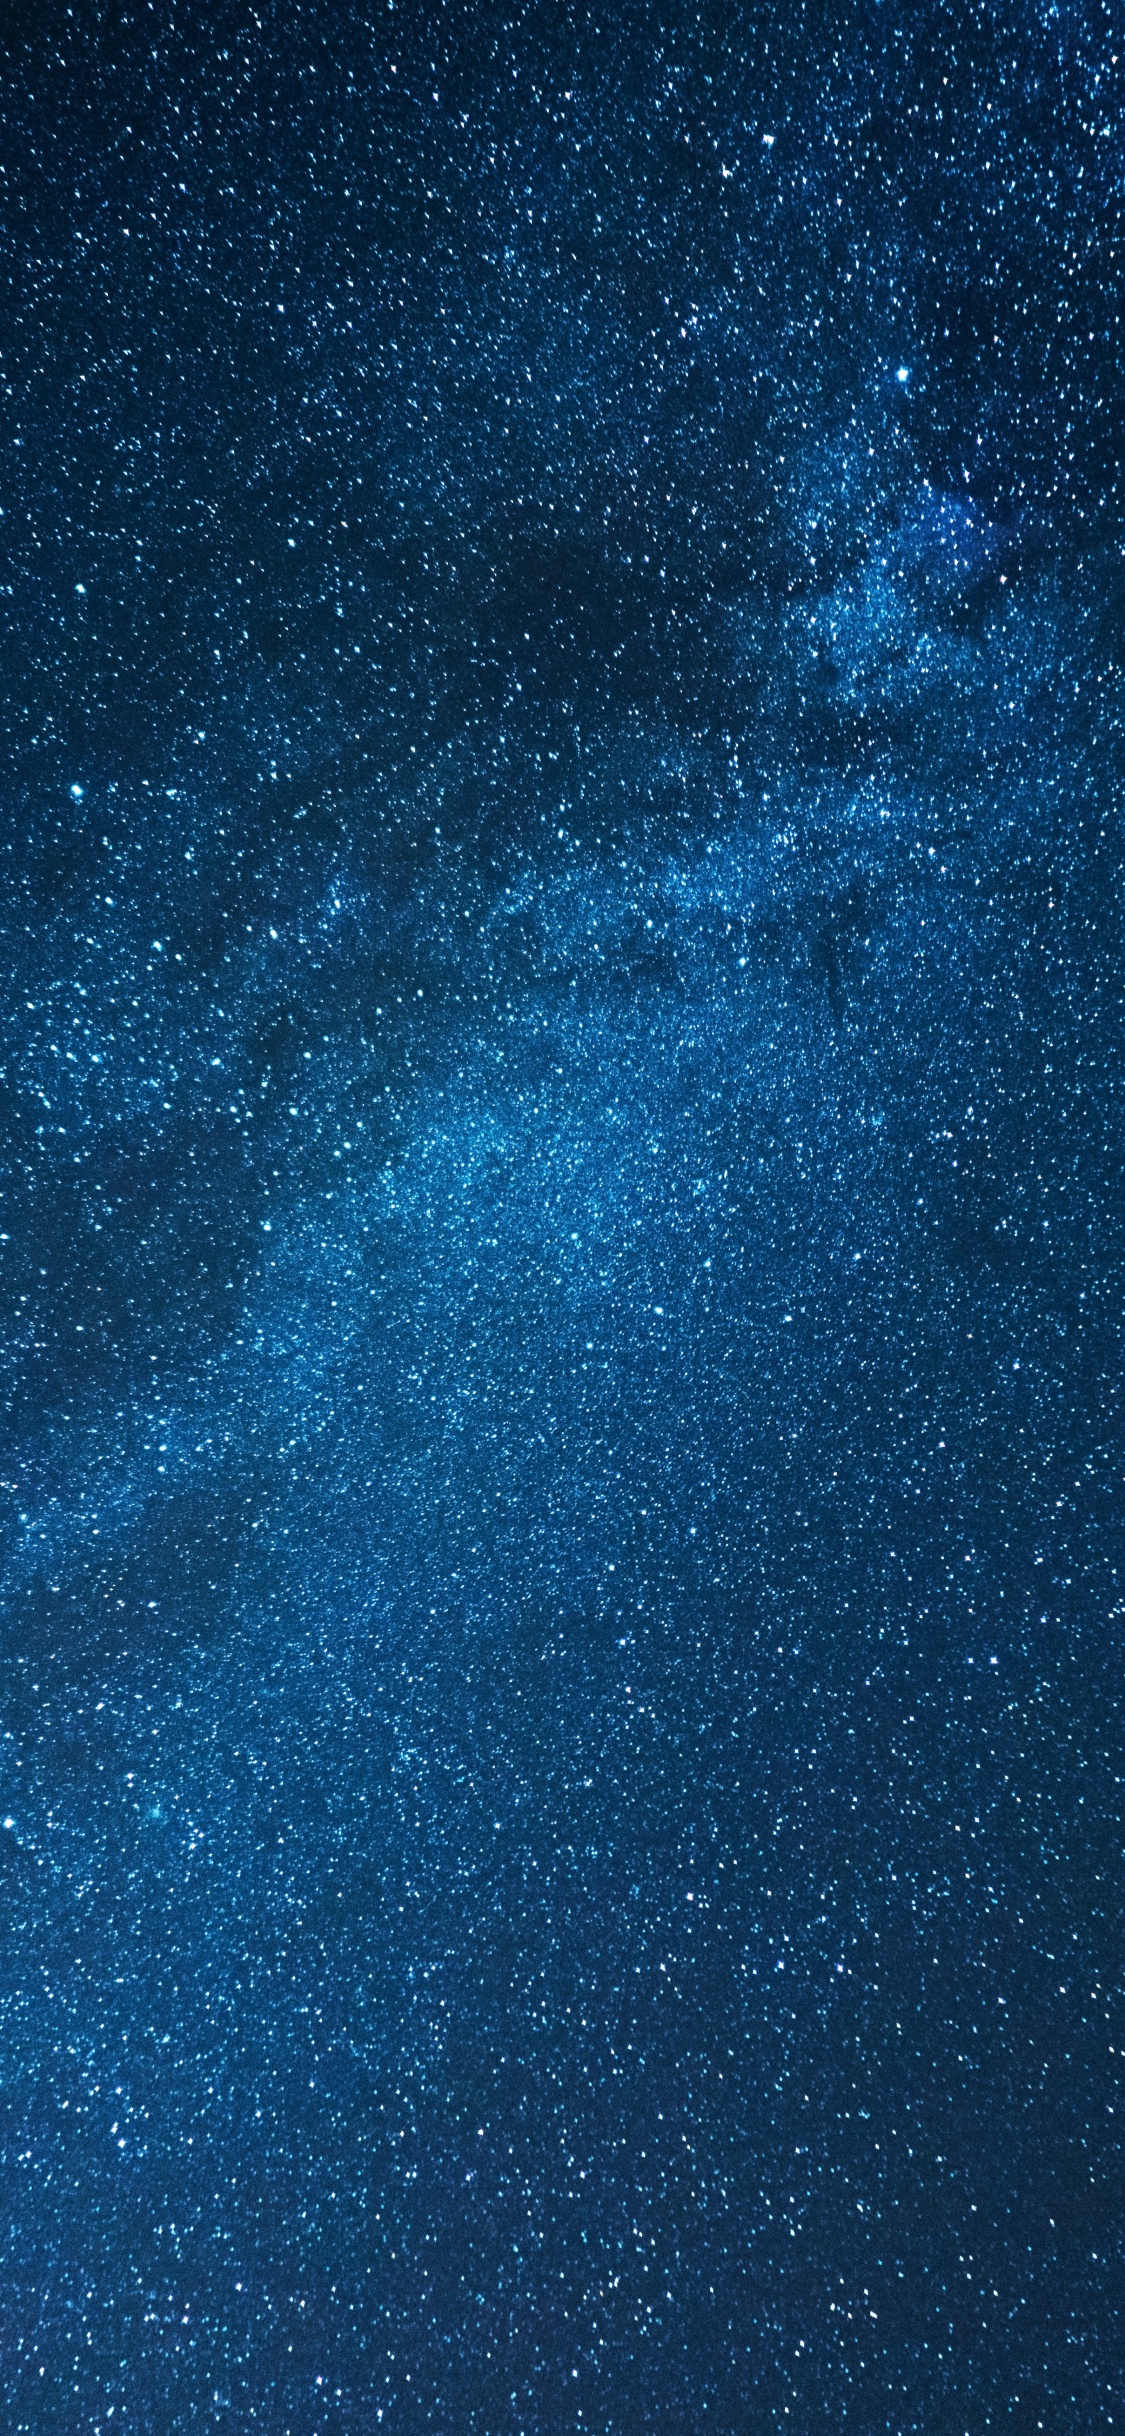 Blue and White Starry Night Sky. Wallpaper in 1125x2436 Resolution